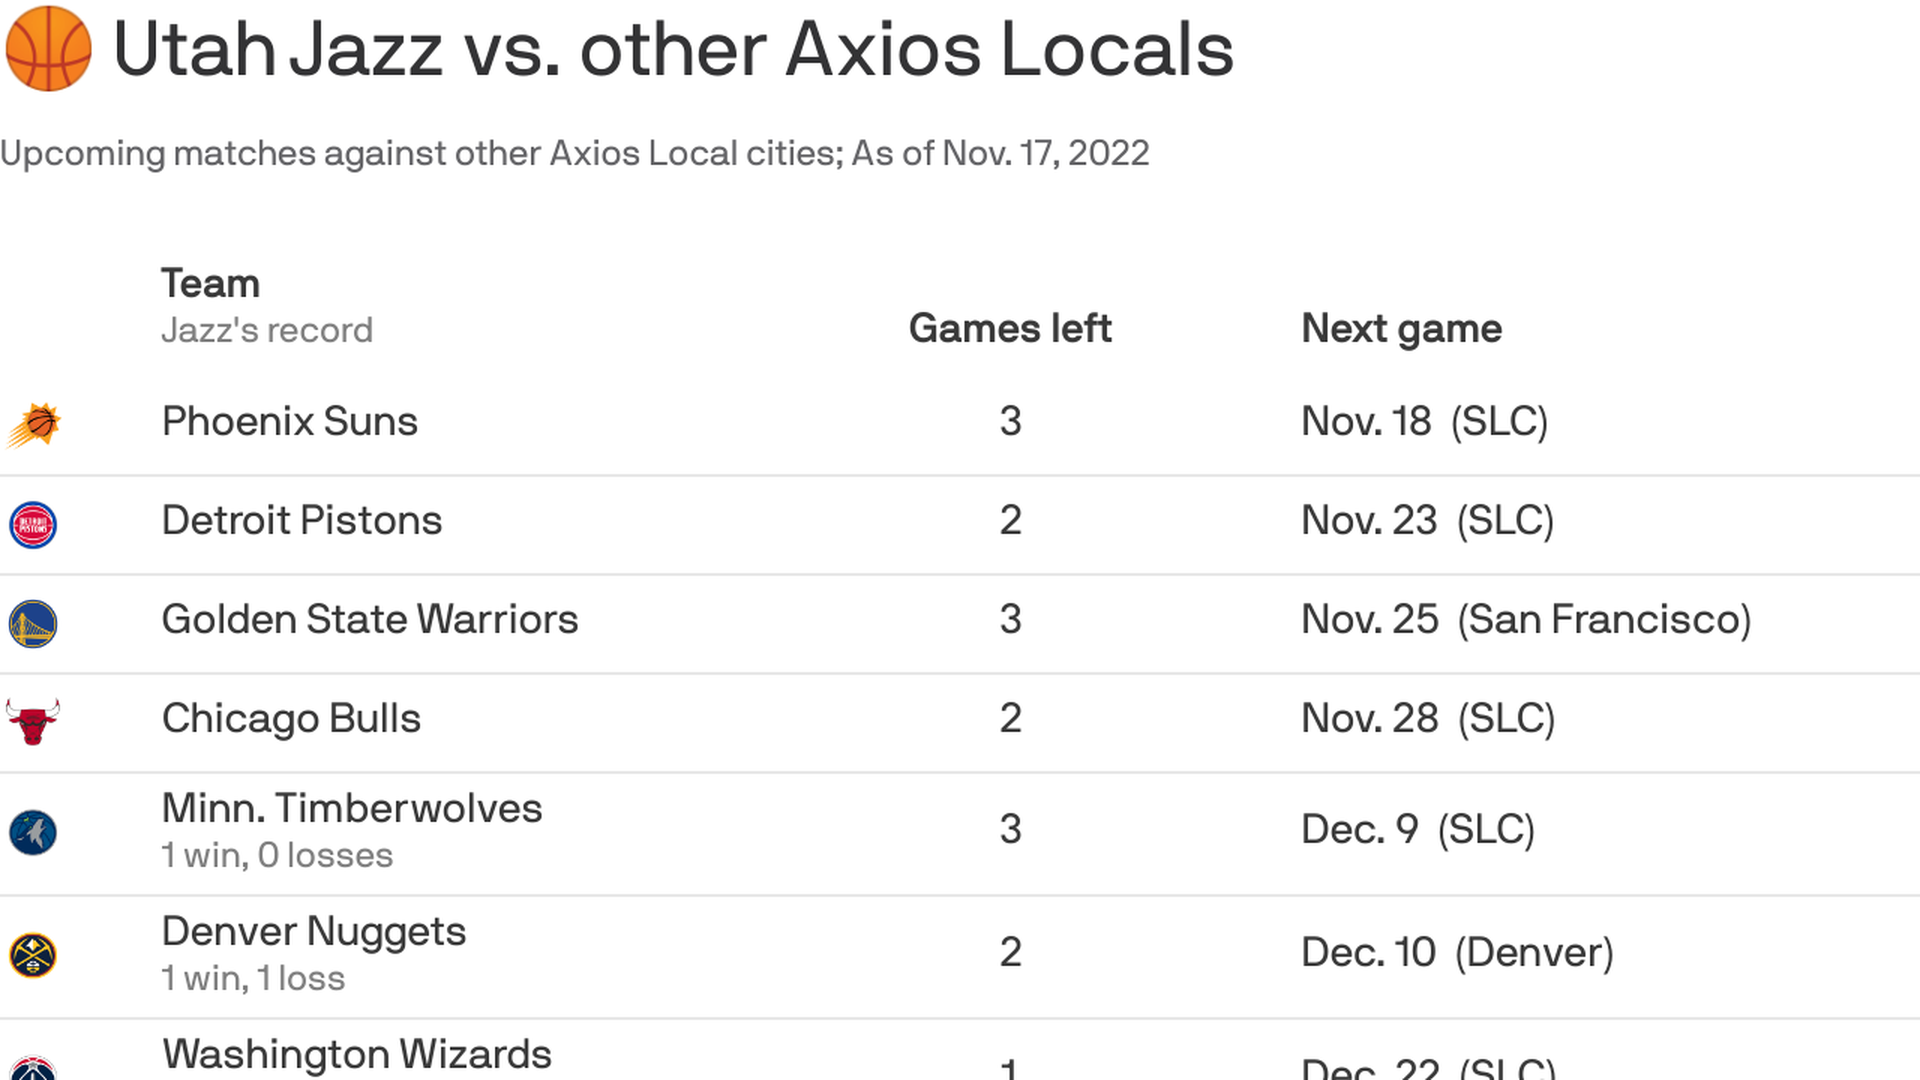 A table showing Utah Jazz's upcoming matches against 14 other Axios Local cities.